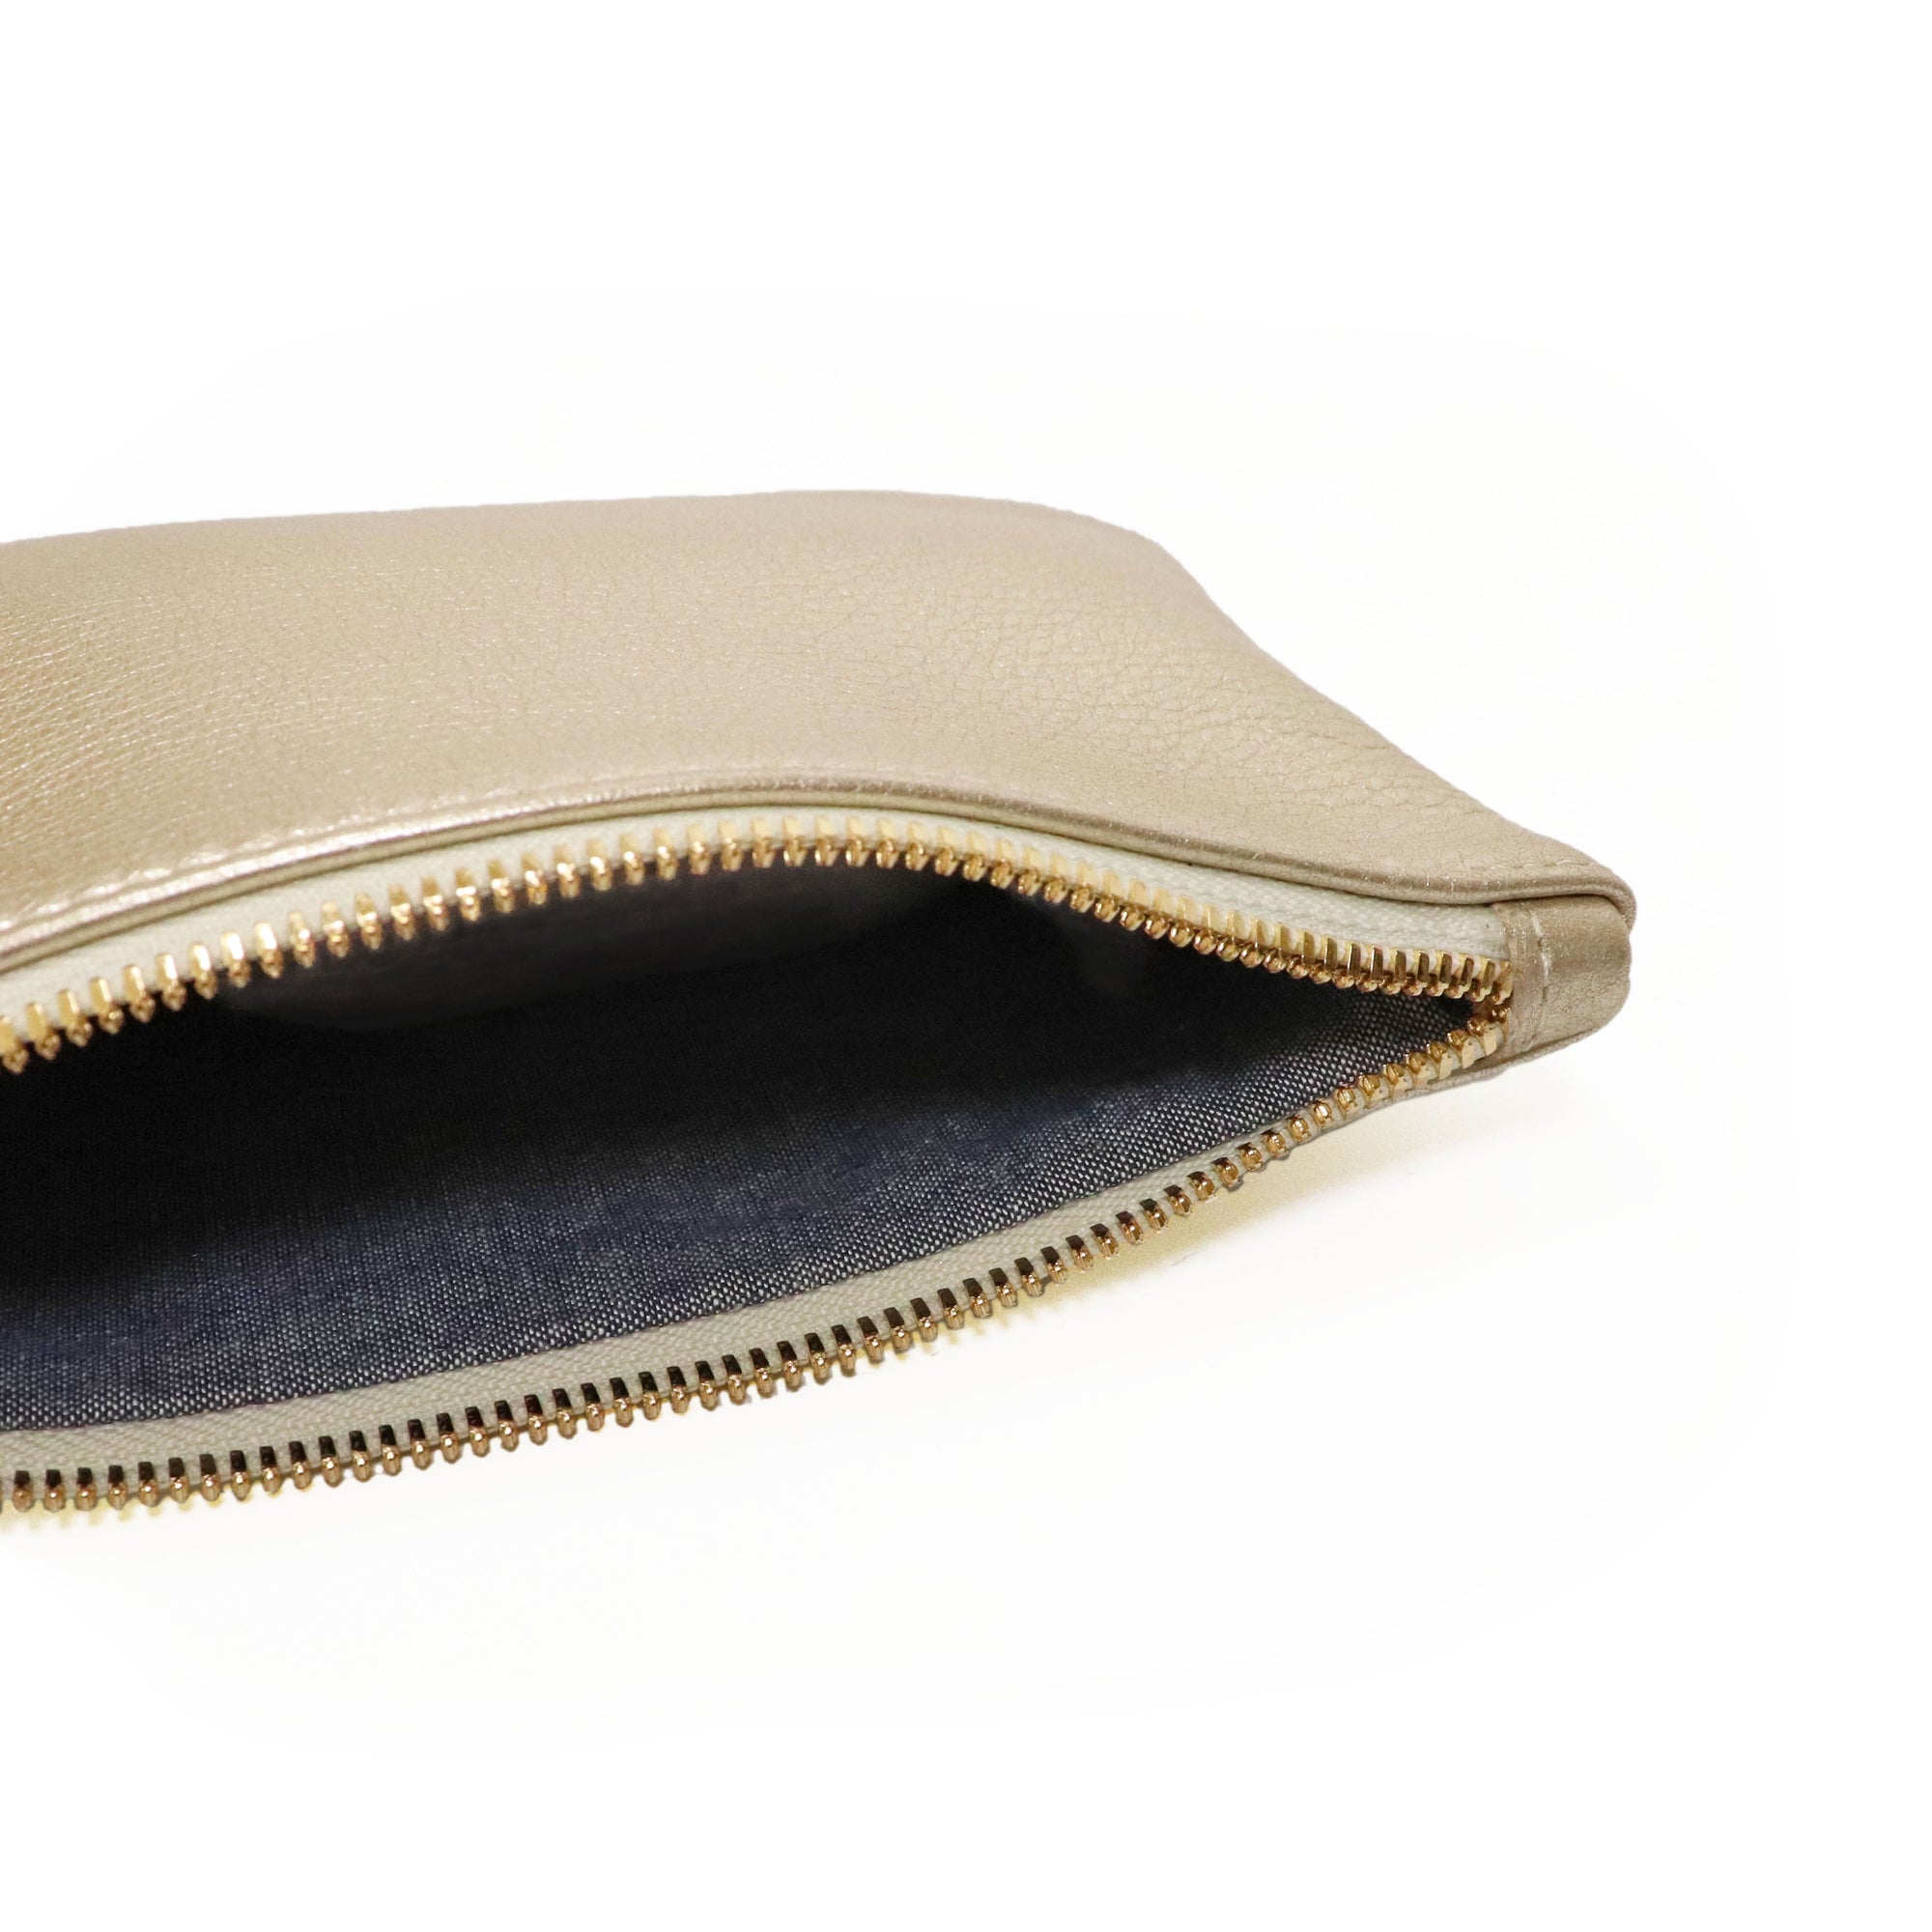 Carmel - Leather zipper clutch in champagne metallic leather.  Made in USA by jana kay 